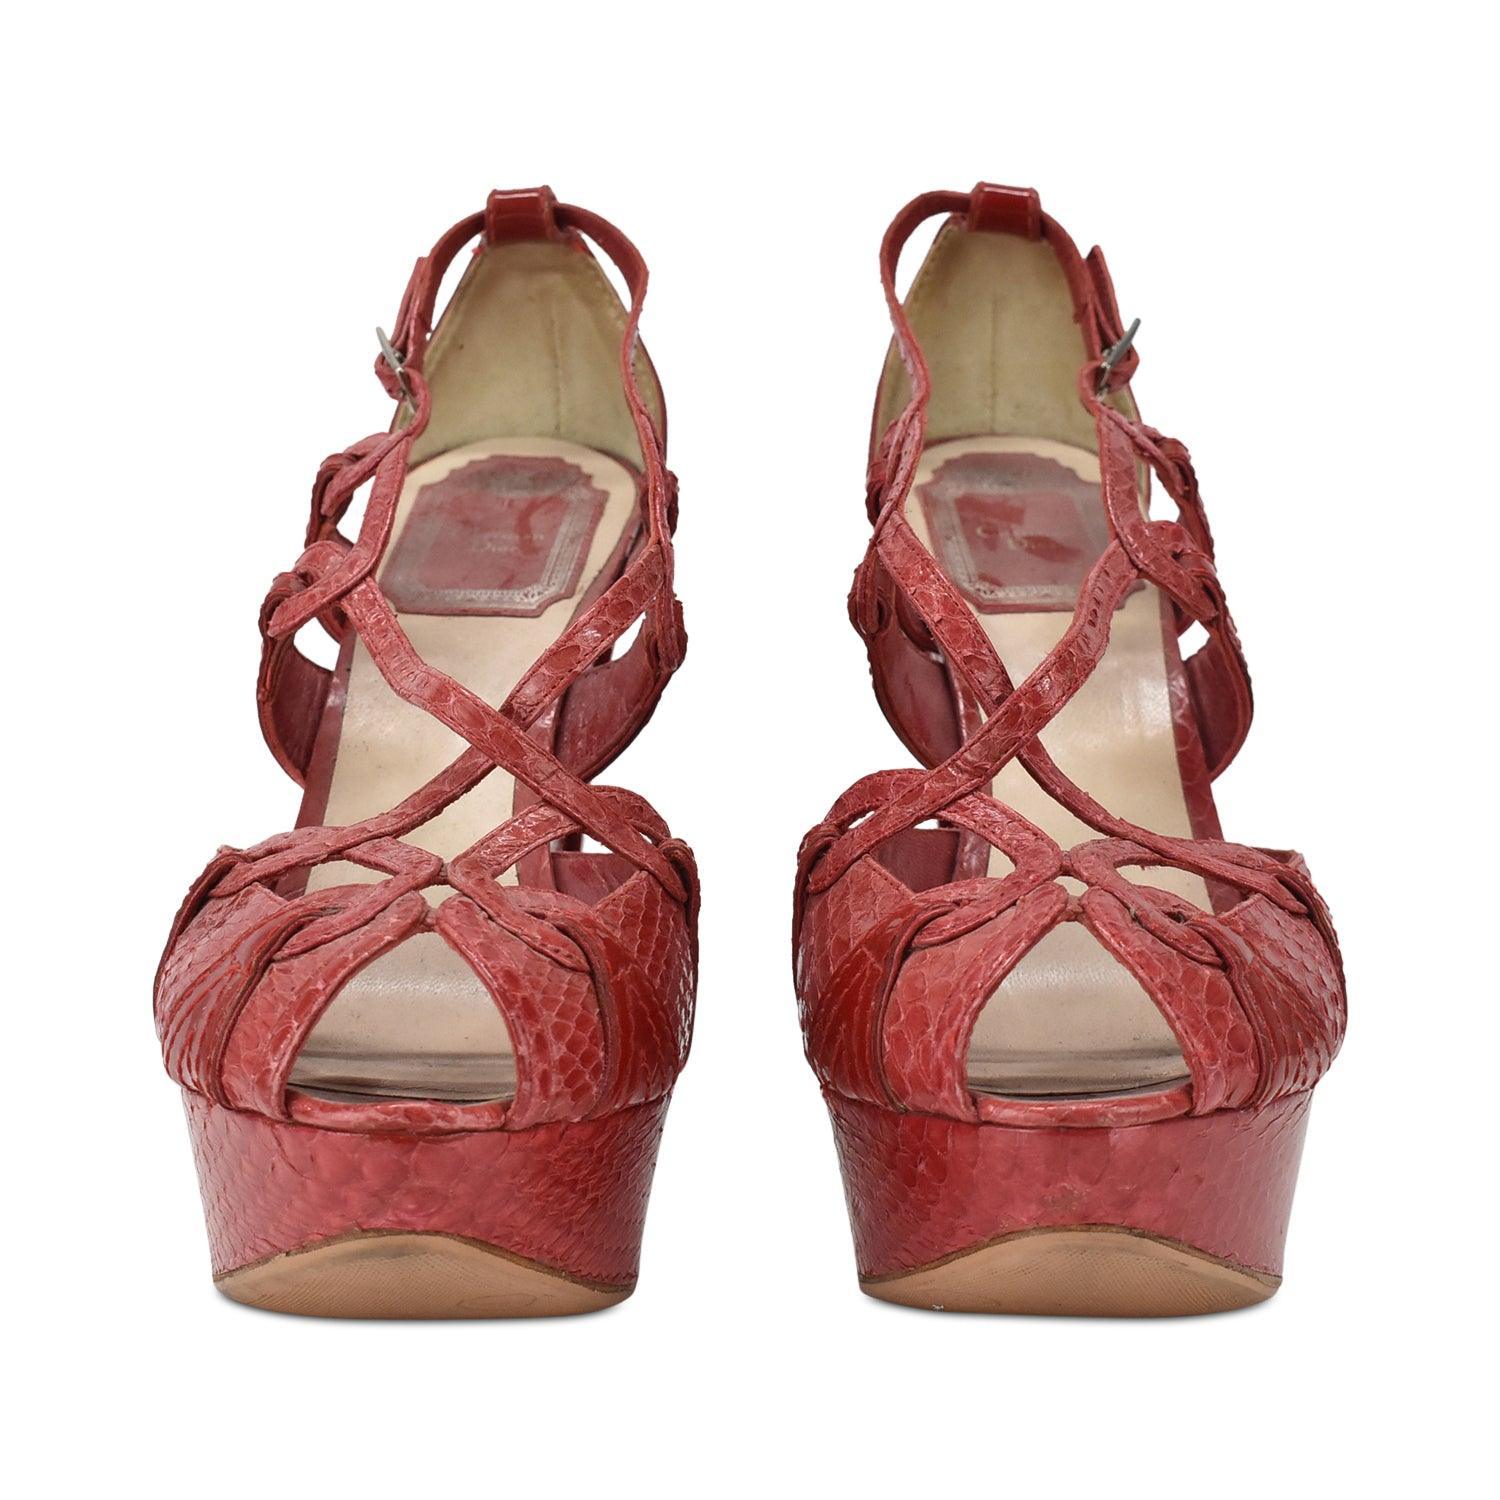 Christian Dior Wedges - Women's 36.5 - Fashionably Yours